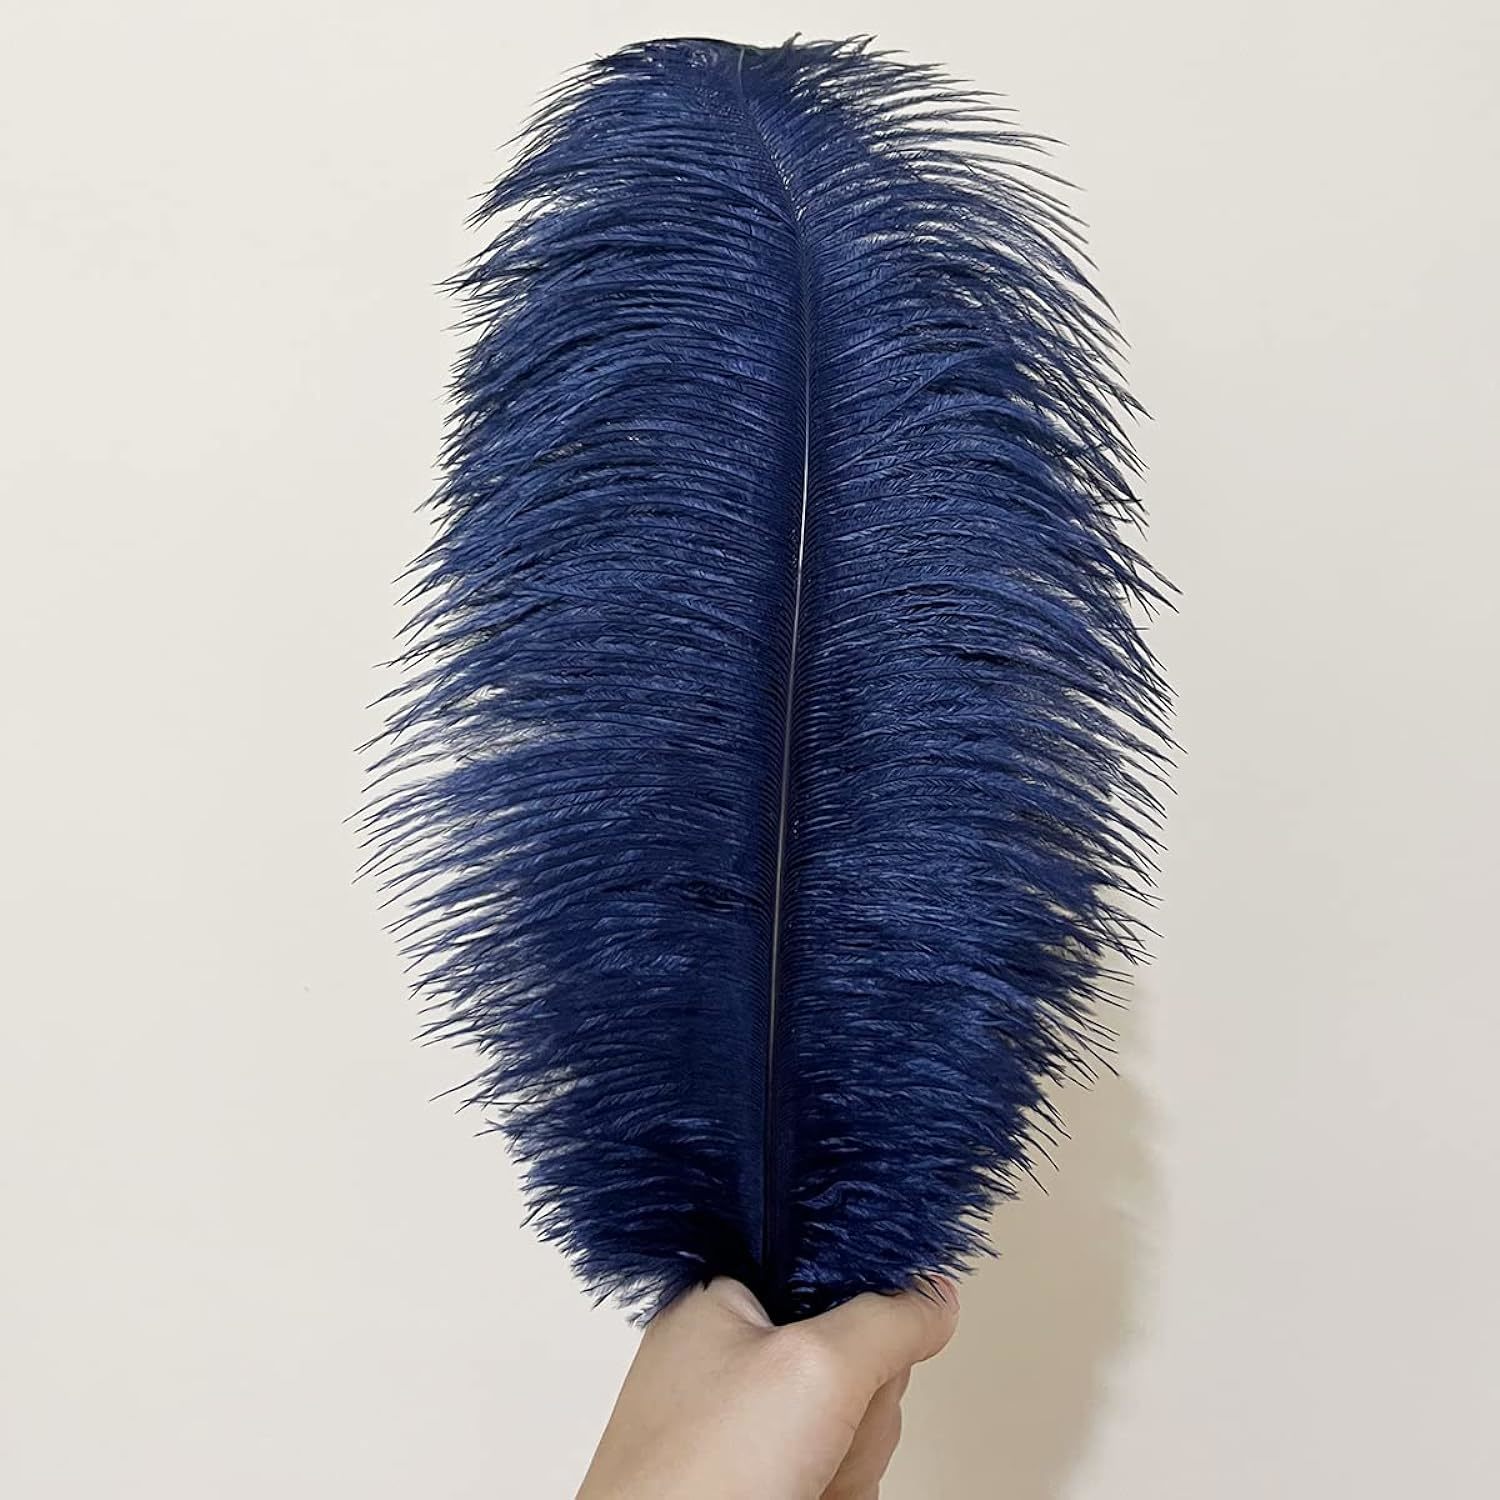 Ostrich Feathers - 16-18 Tail Feathers - Rainbow